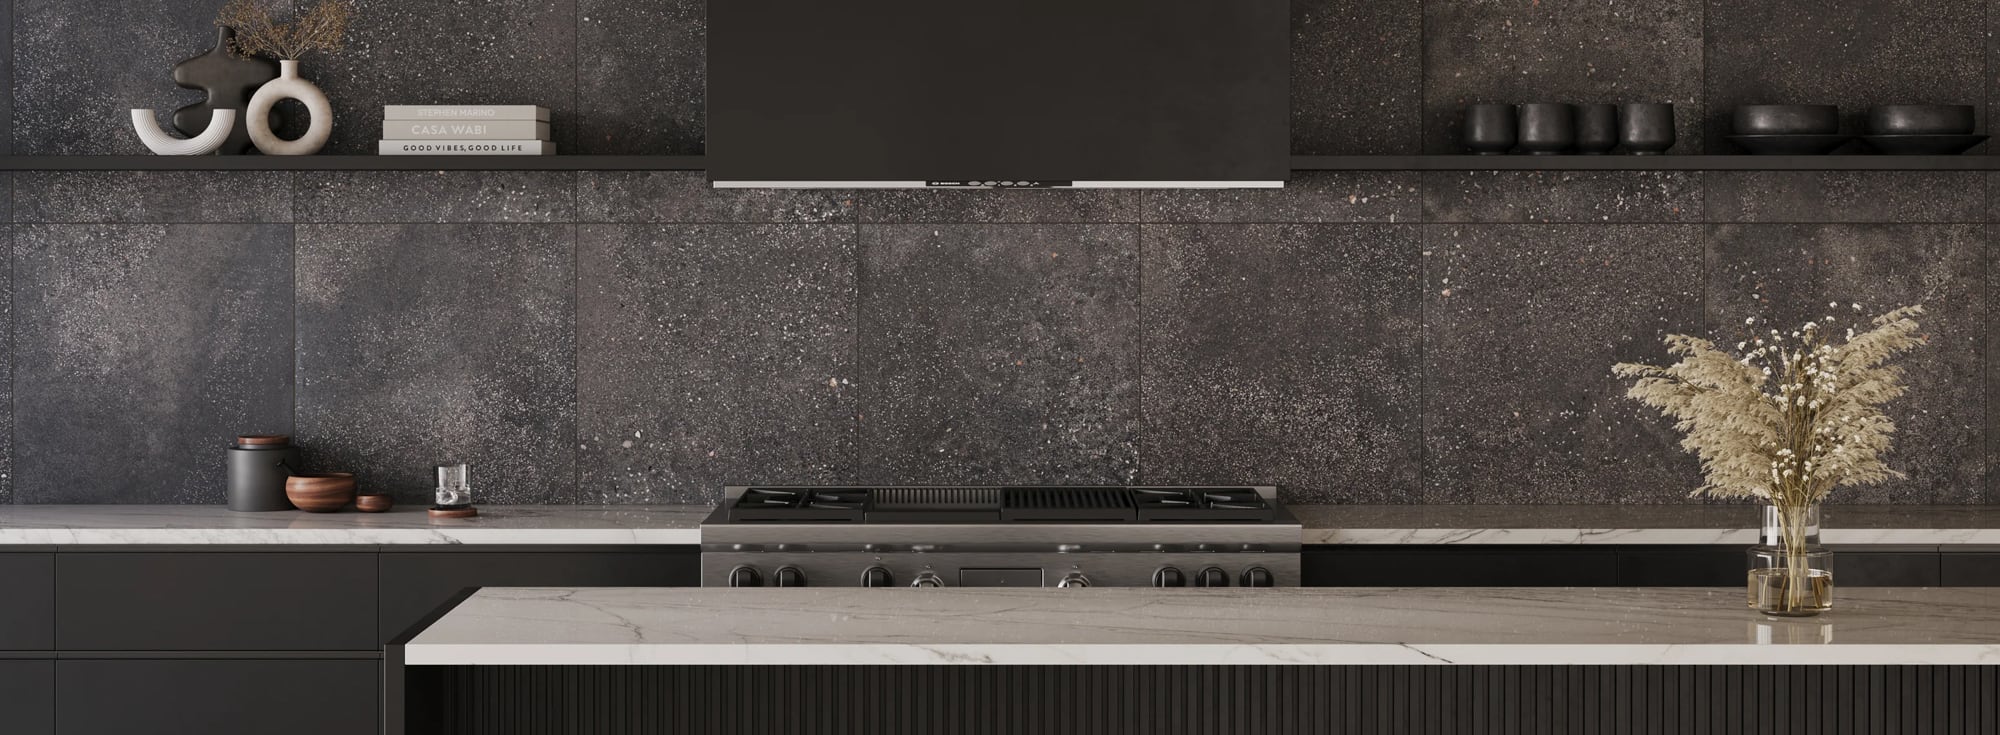 Chic dark grey tile backdrop in a modern kitchen adds depth and drama, accented by natural decor and marble countertops